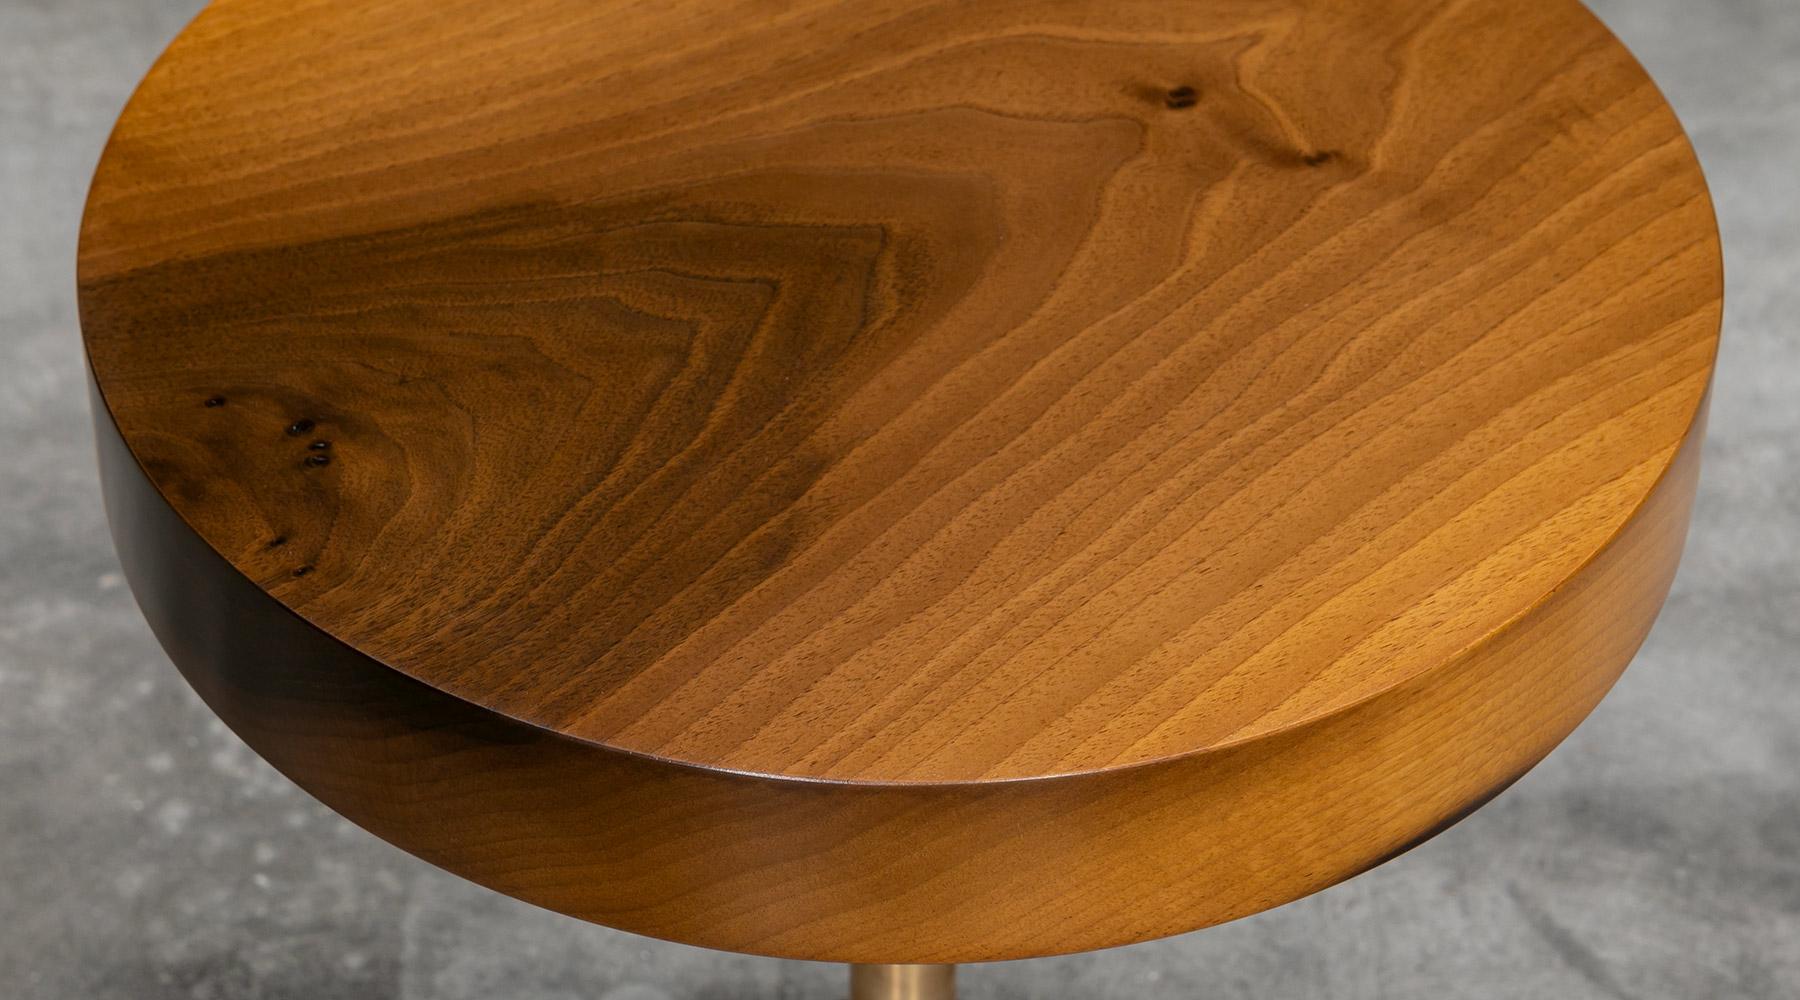 Stunning side table by contemporary German Artist Johannes Hock.
The inherent beauty of the wood becomes visible with this table. 
Designed, developed and handcrafted by Atelier Johannes Hock, Frankfurt, Germany.